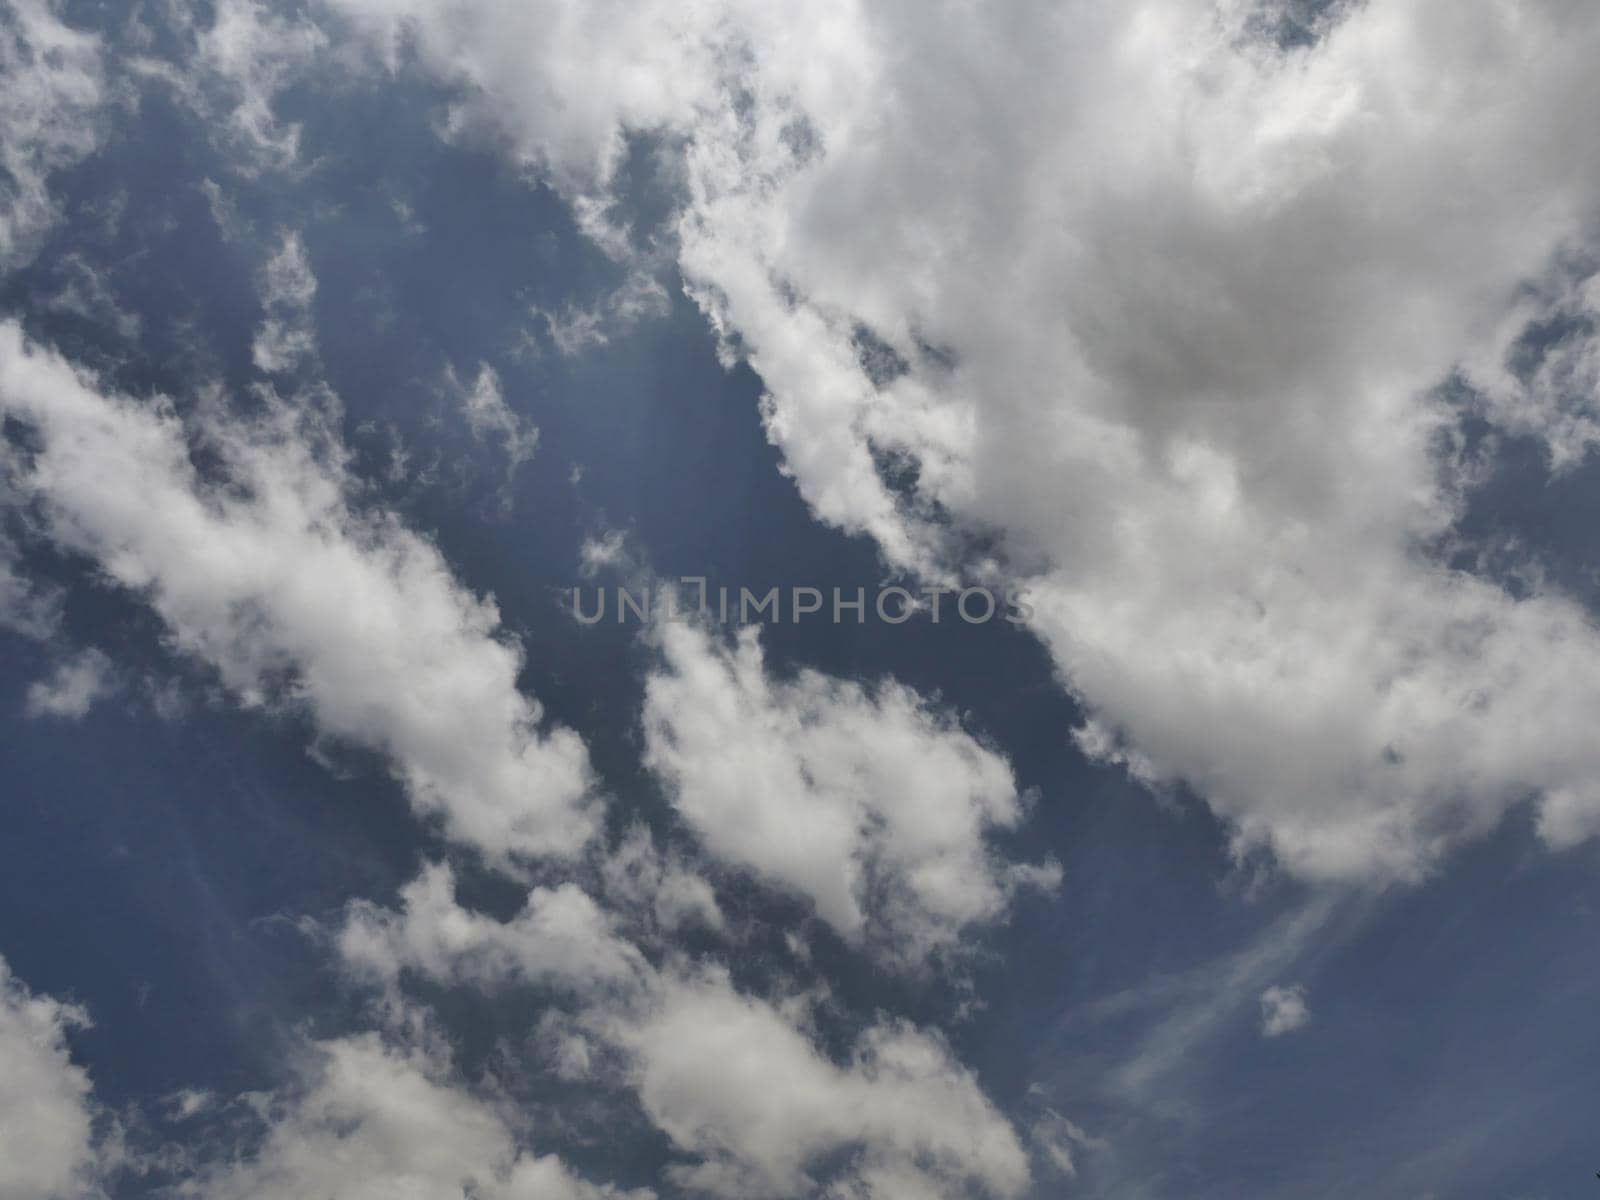 Beautiful blue sky and clouds natural background